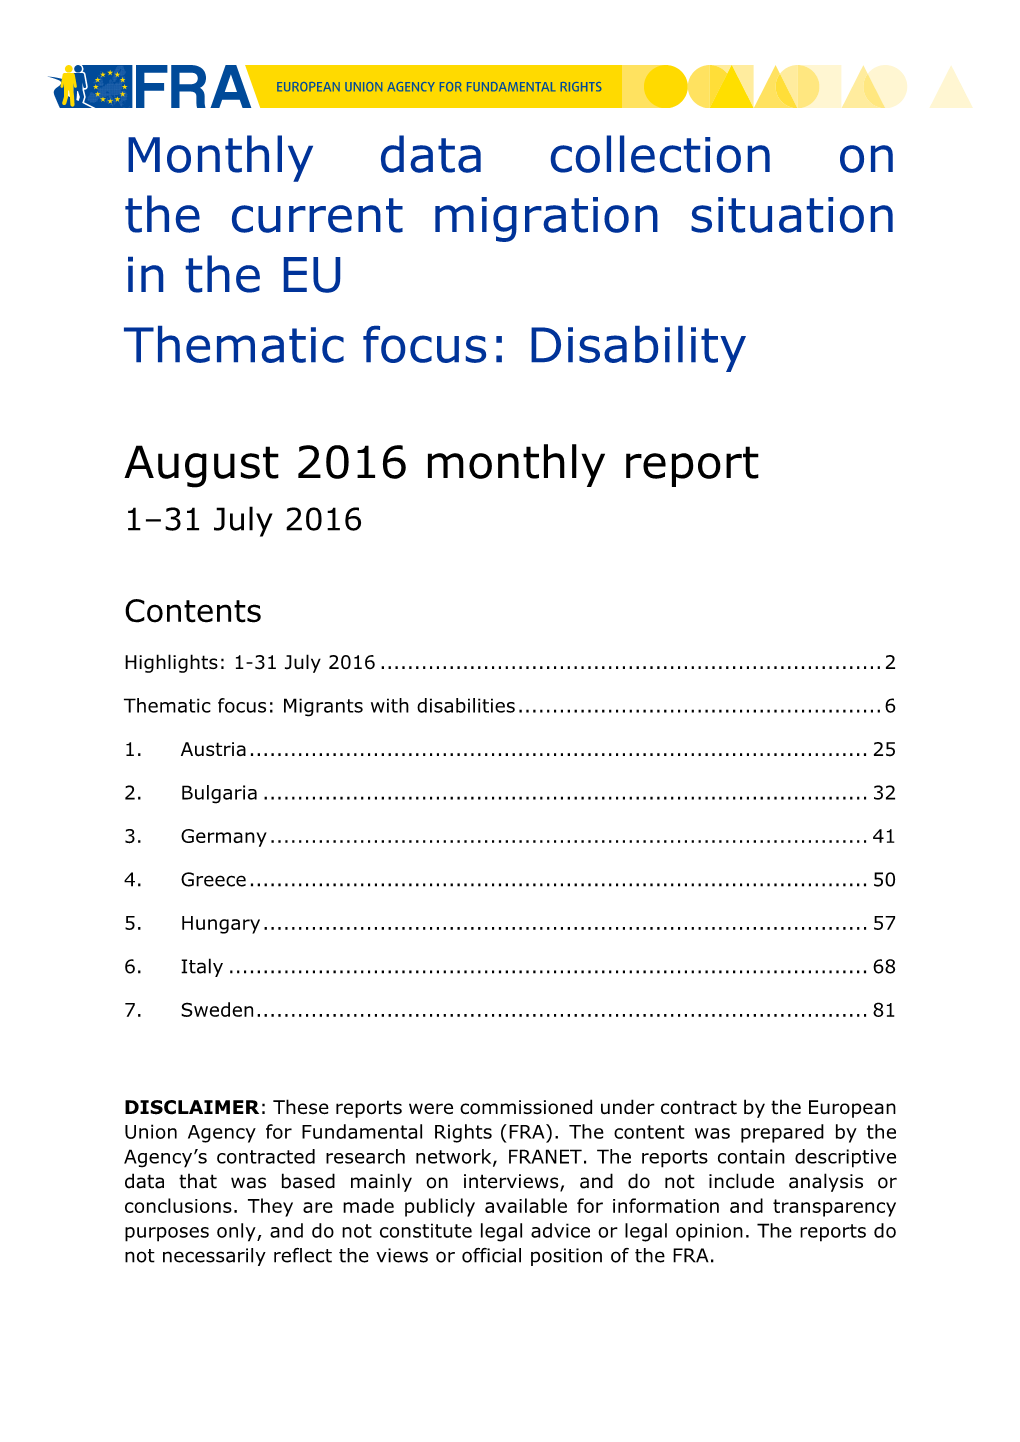 Monthly Data Collection on the Current Migration Situation in the EU Thematic Focus: Disability